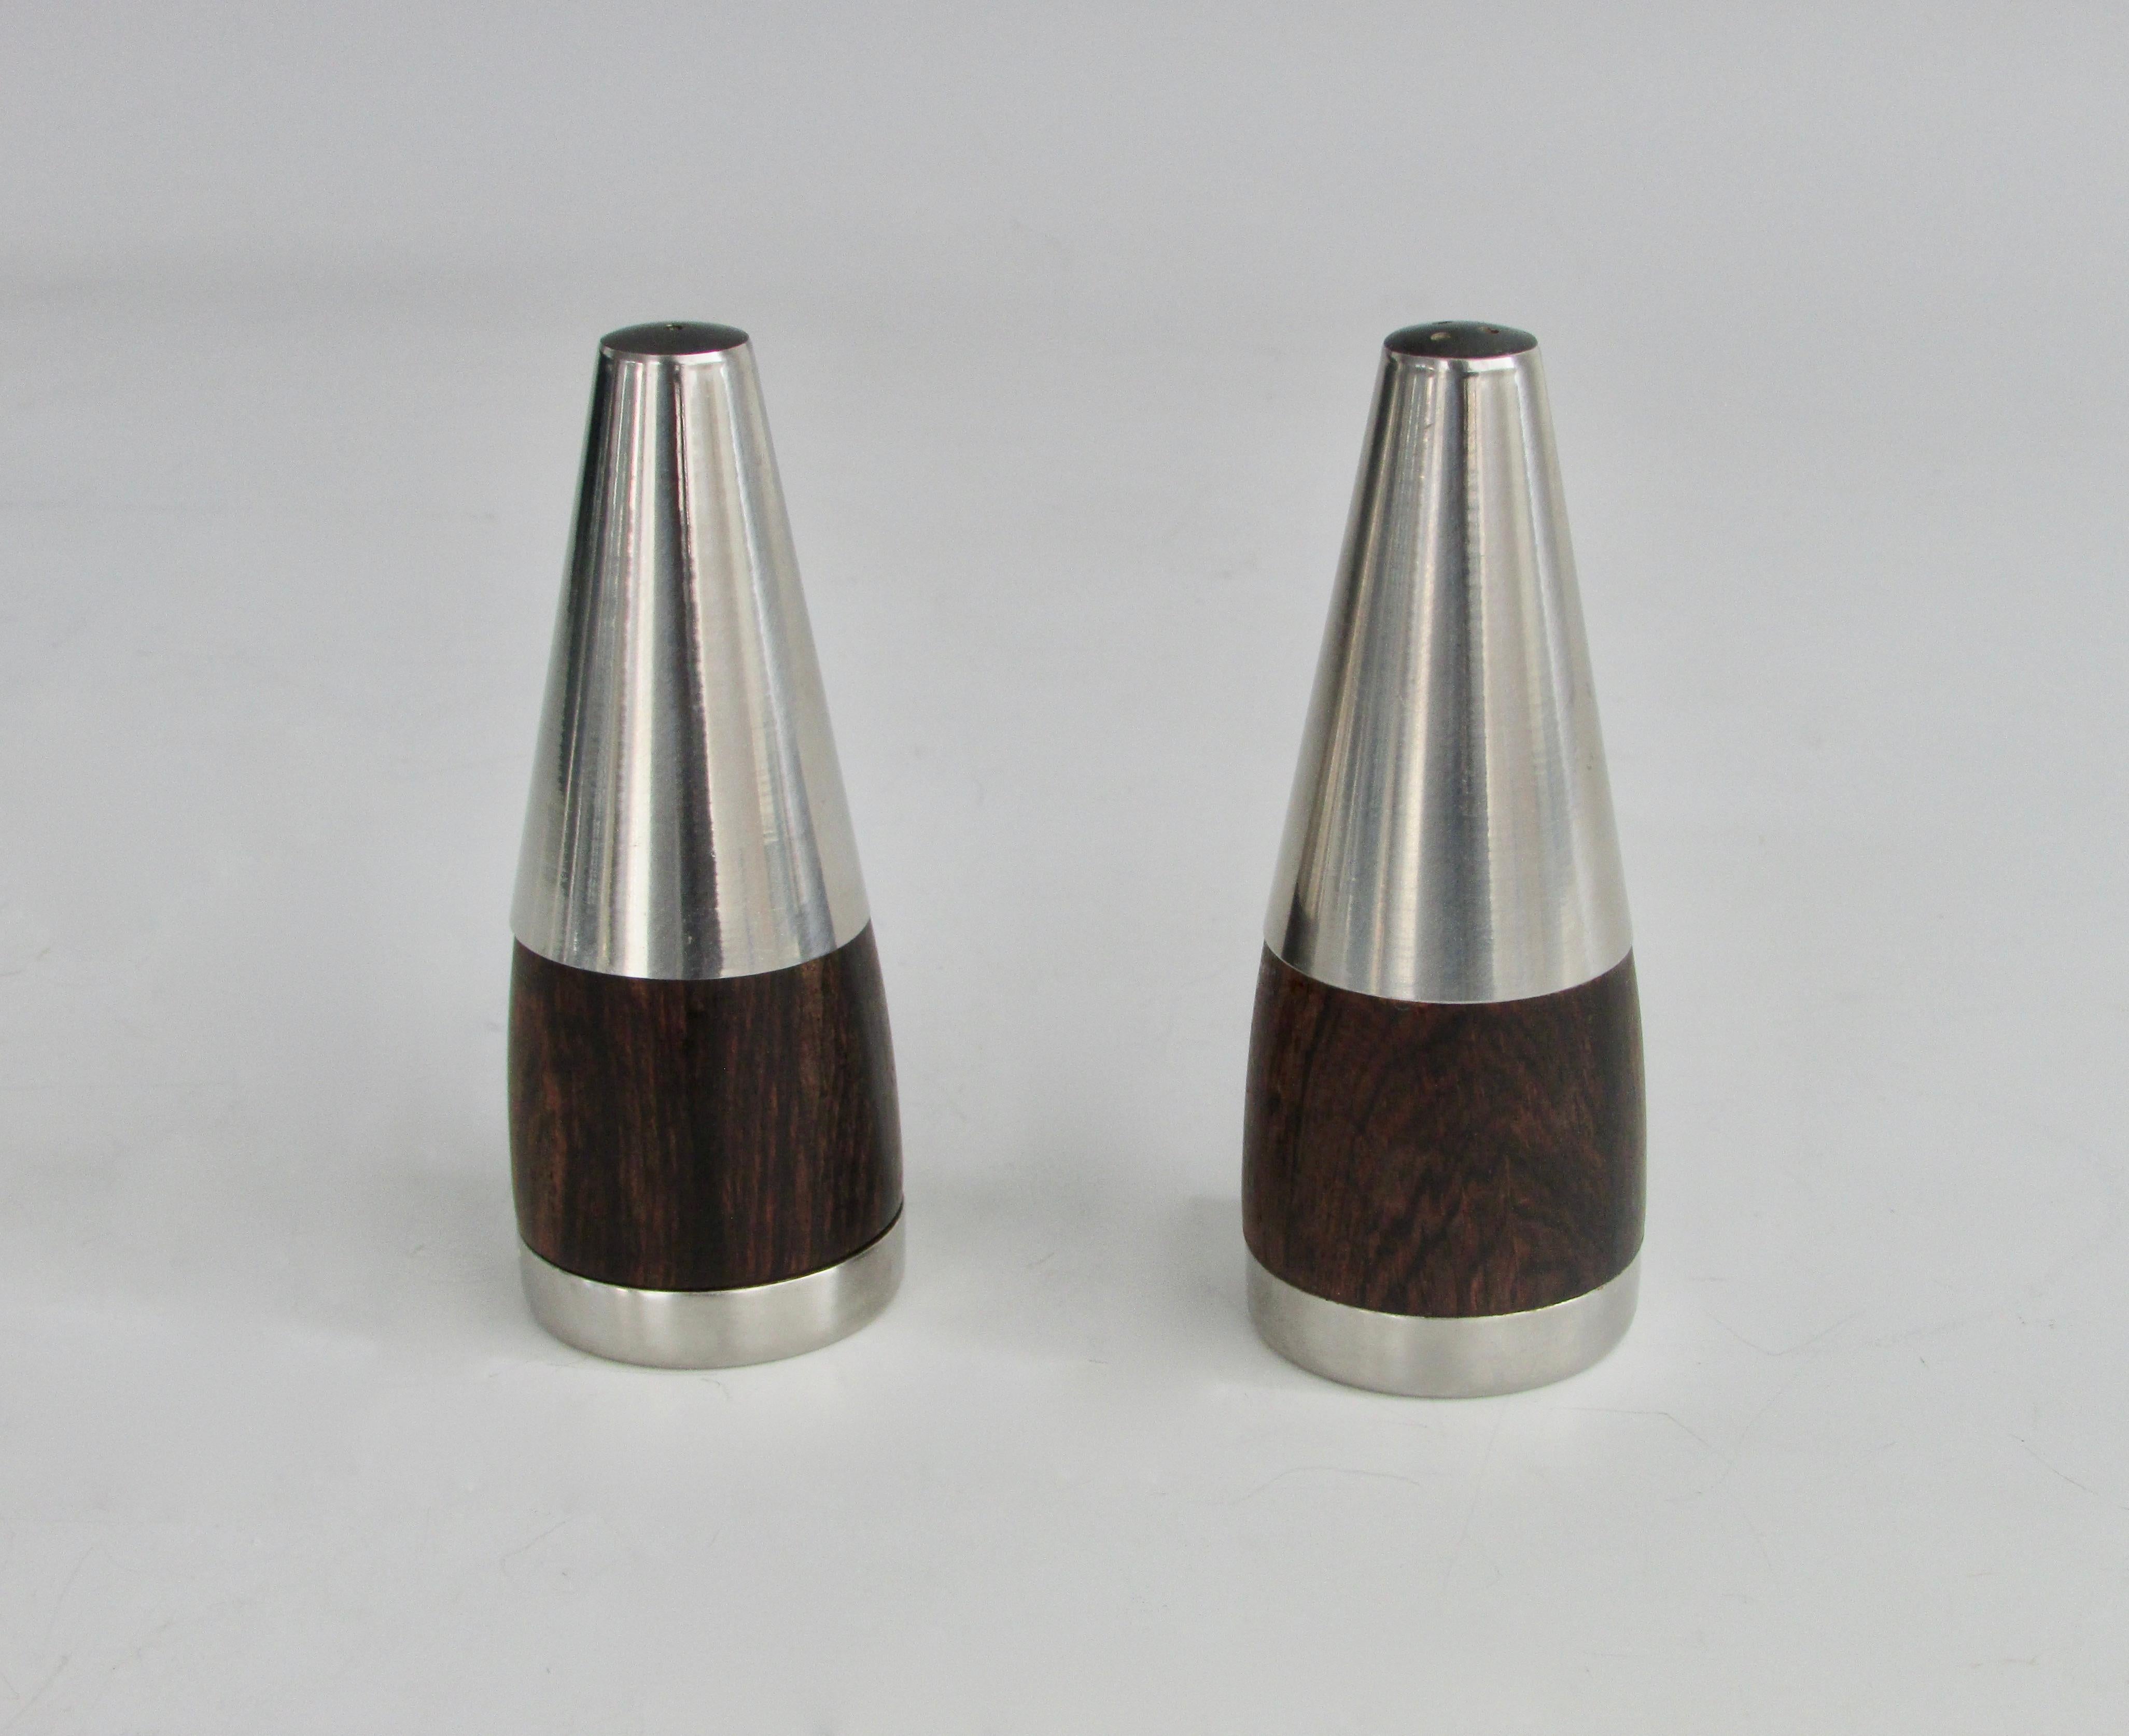 Pair of Danish salt pepper shakers. Conical stainless steel tops sit on rosewood bodies. Retain original dried our Nade in Denmark stopper.